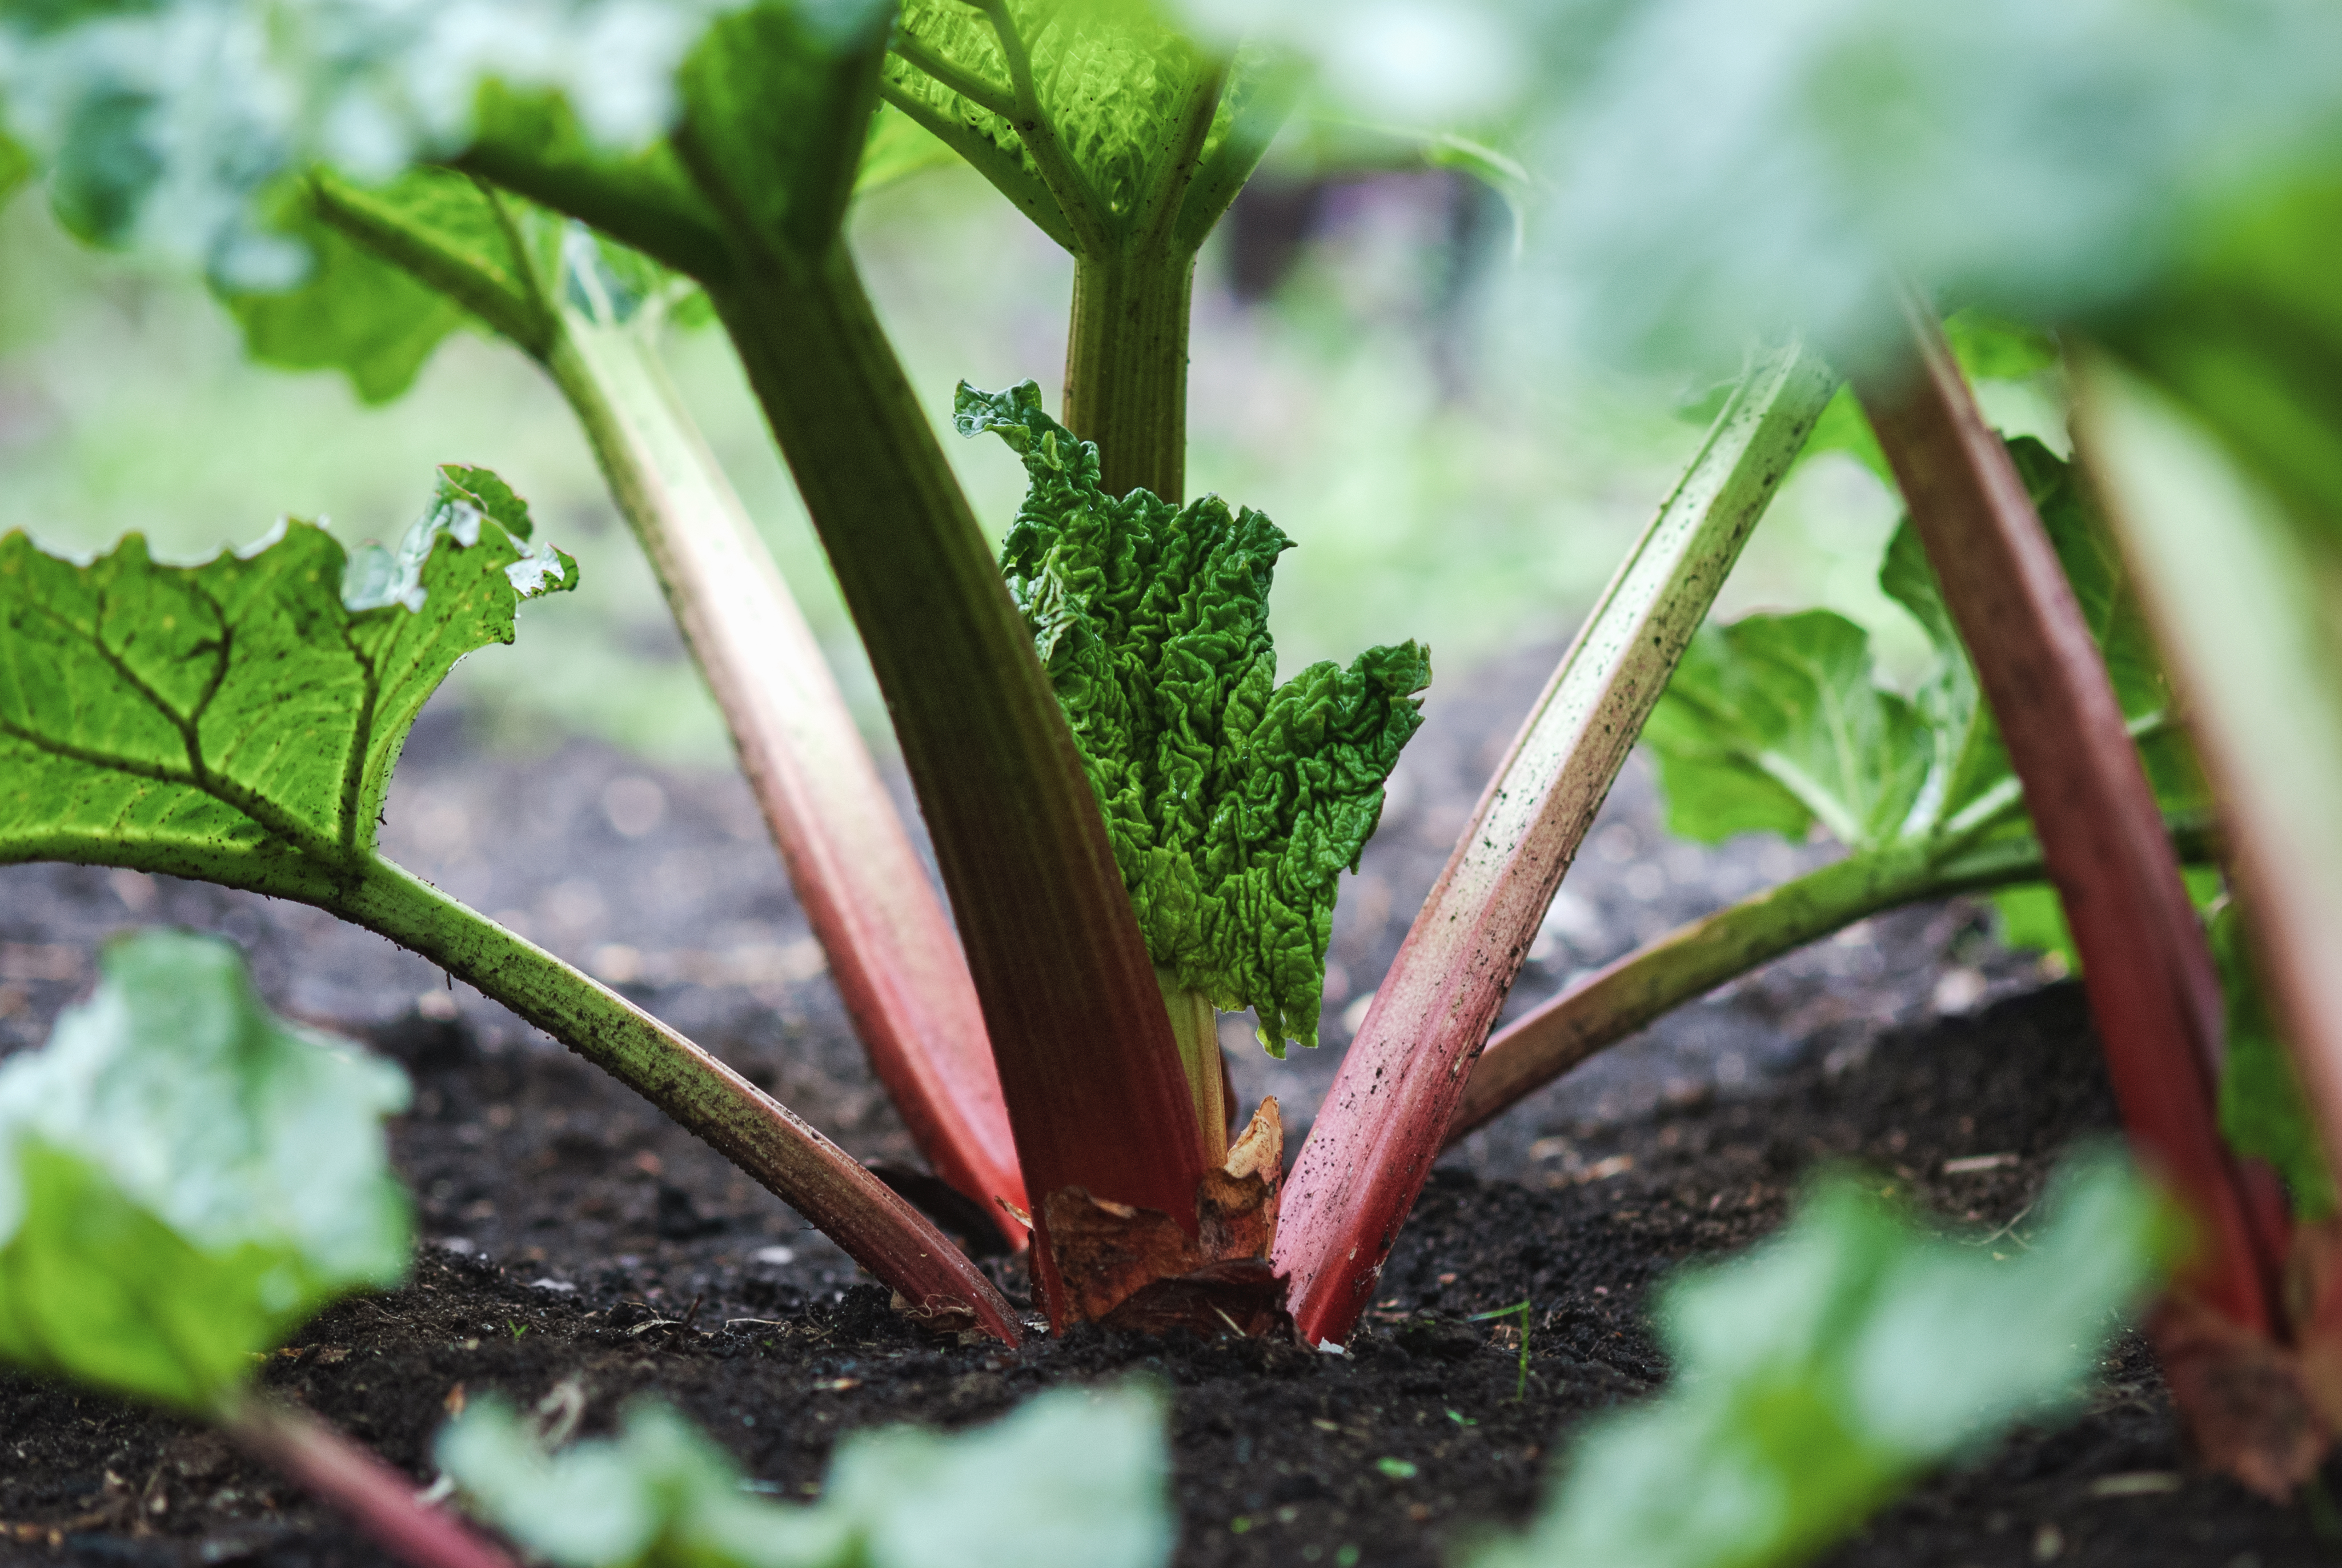 Rhubarb plants with young leaves